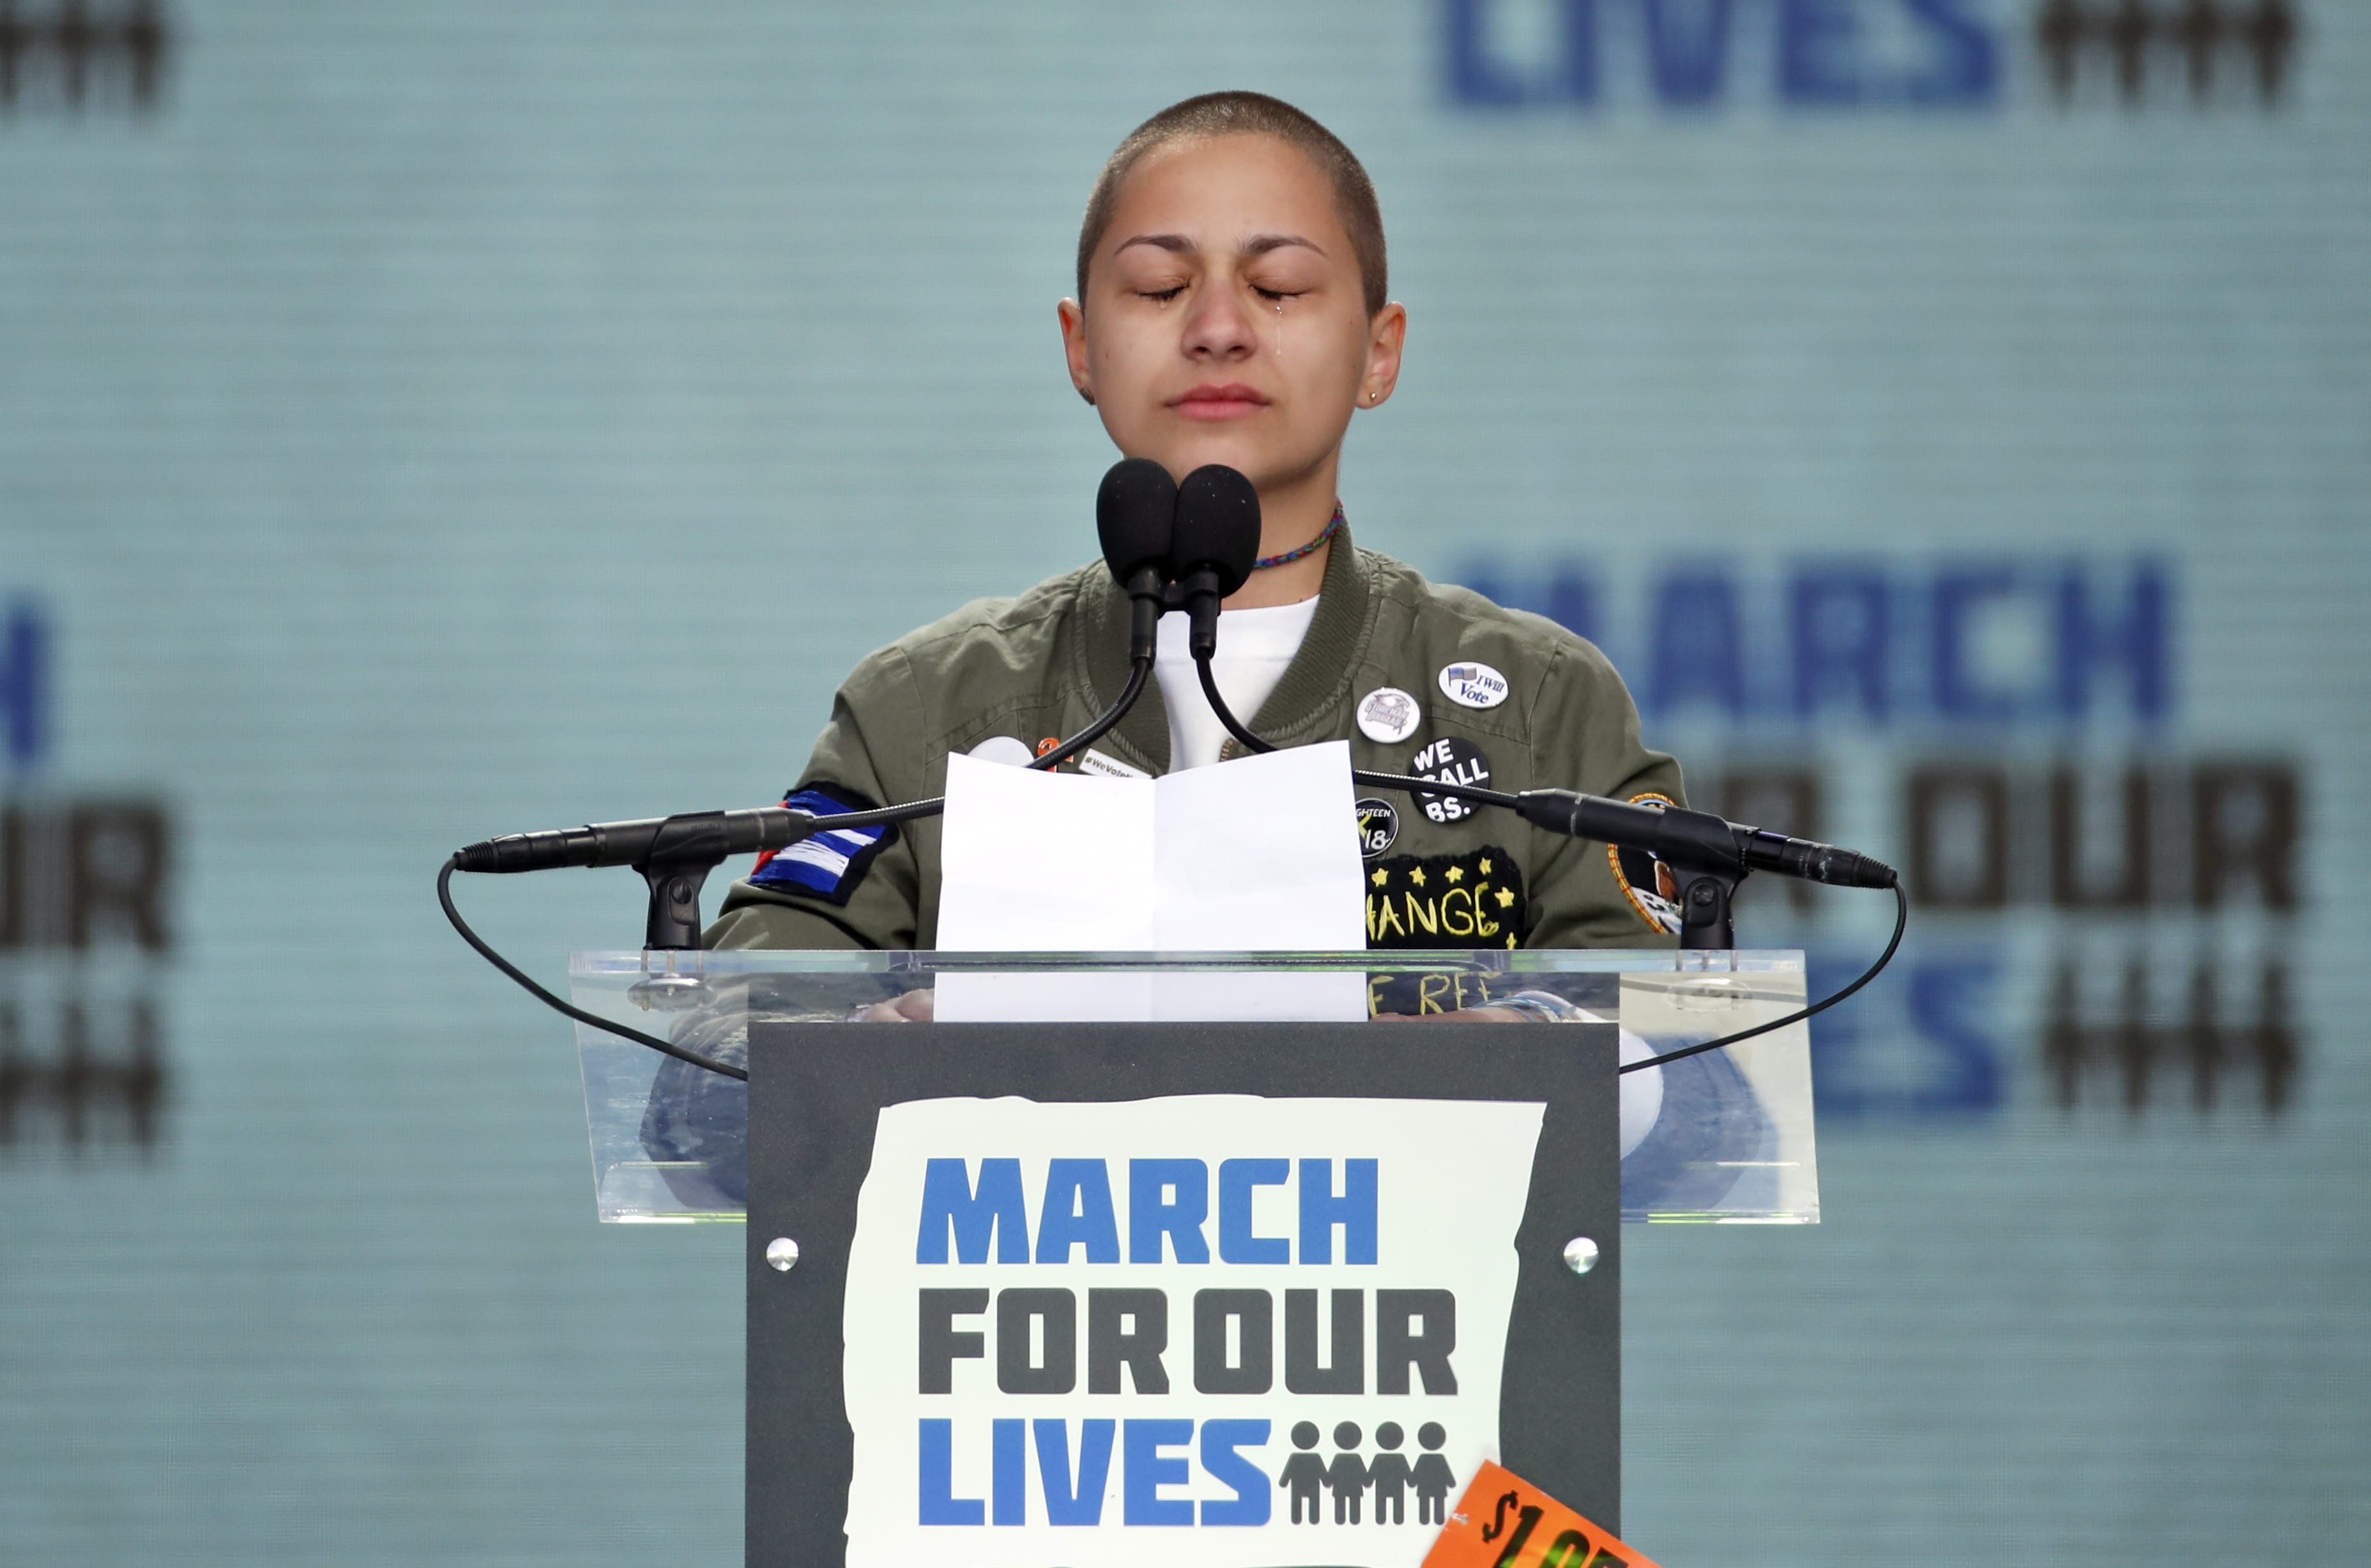 Emma Gonzalez, a survivor of the mass shooting at Marjory Stoneman Douglas High School in Parkland, Fla., closes her eyes and cries as she stands silently at the podium for the amount of time it took the Parkland shooter to go on his killing spree during the 